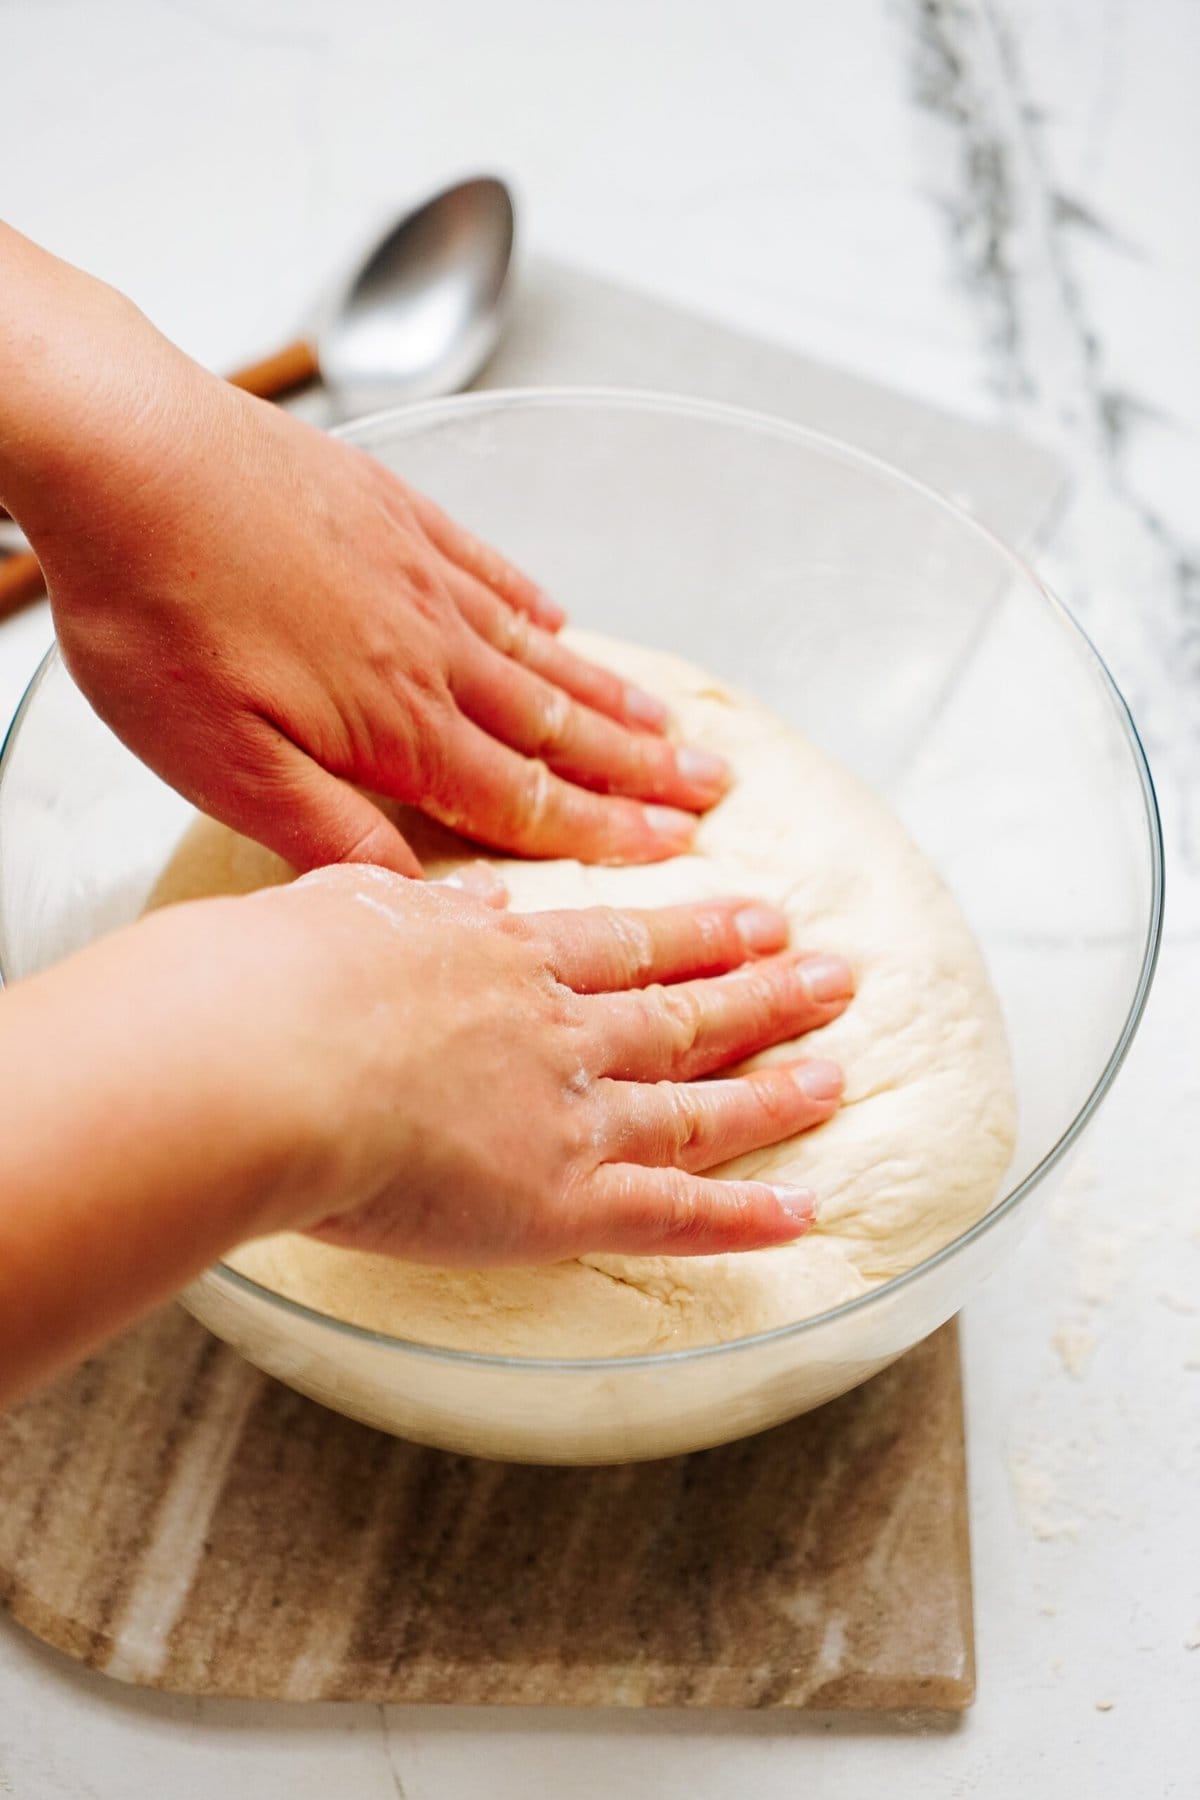 Hands pressing down on dough in a glass bowl, with a spoon on the side; photo taken on a marble surface. The preparation of cinnamon rolls is well underway.